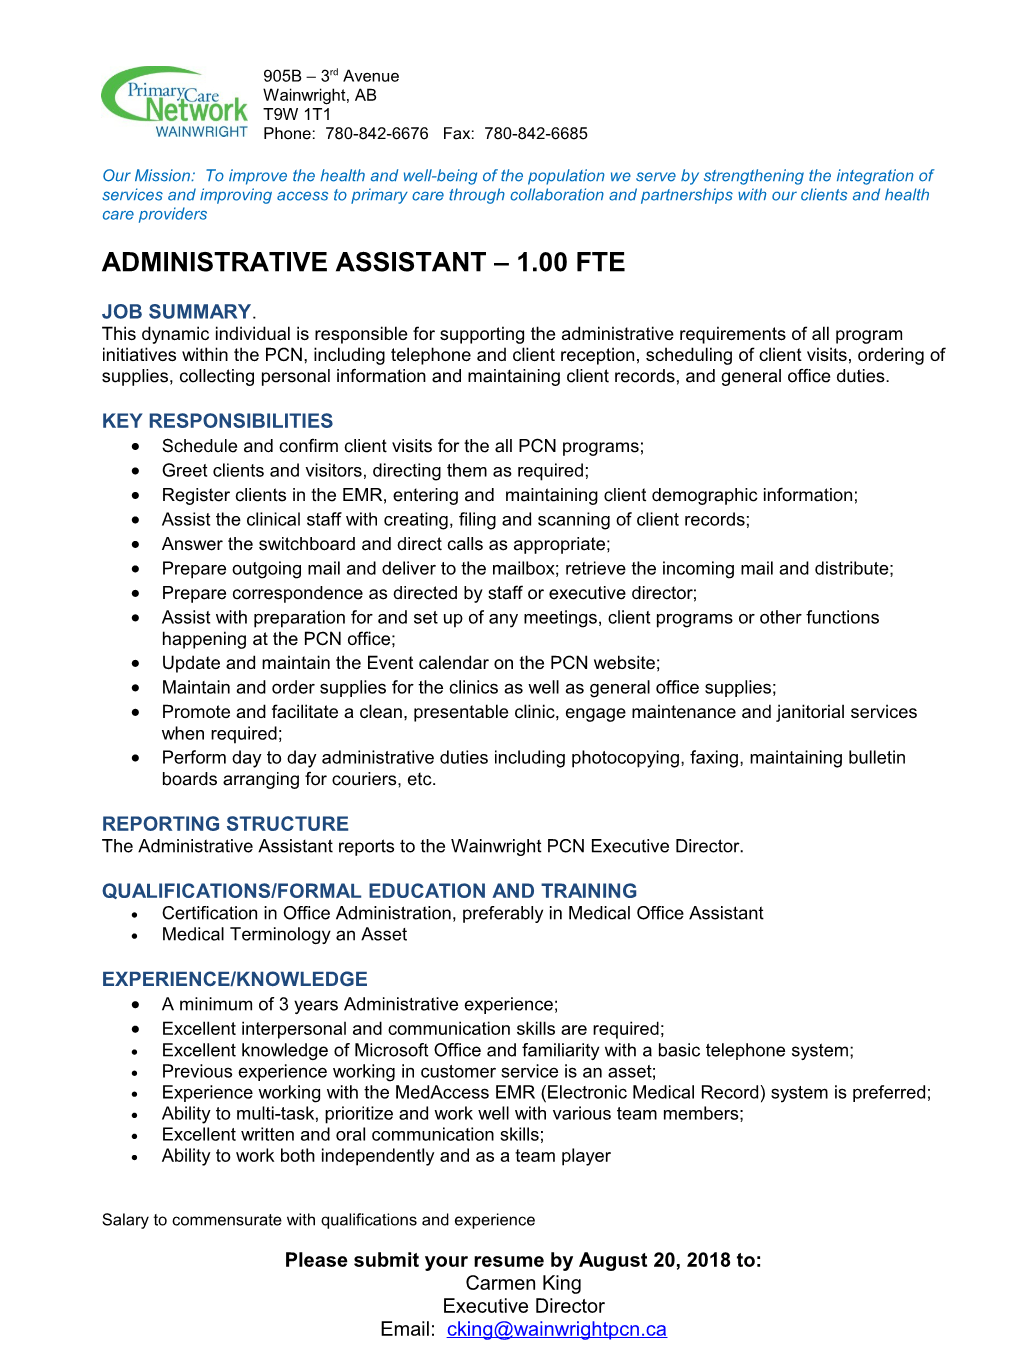 Posting for Administrative Assistant